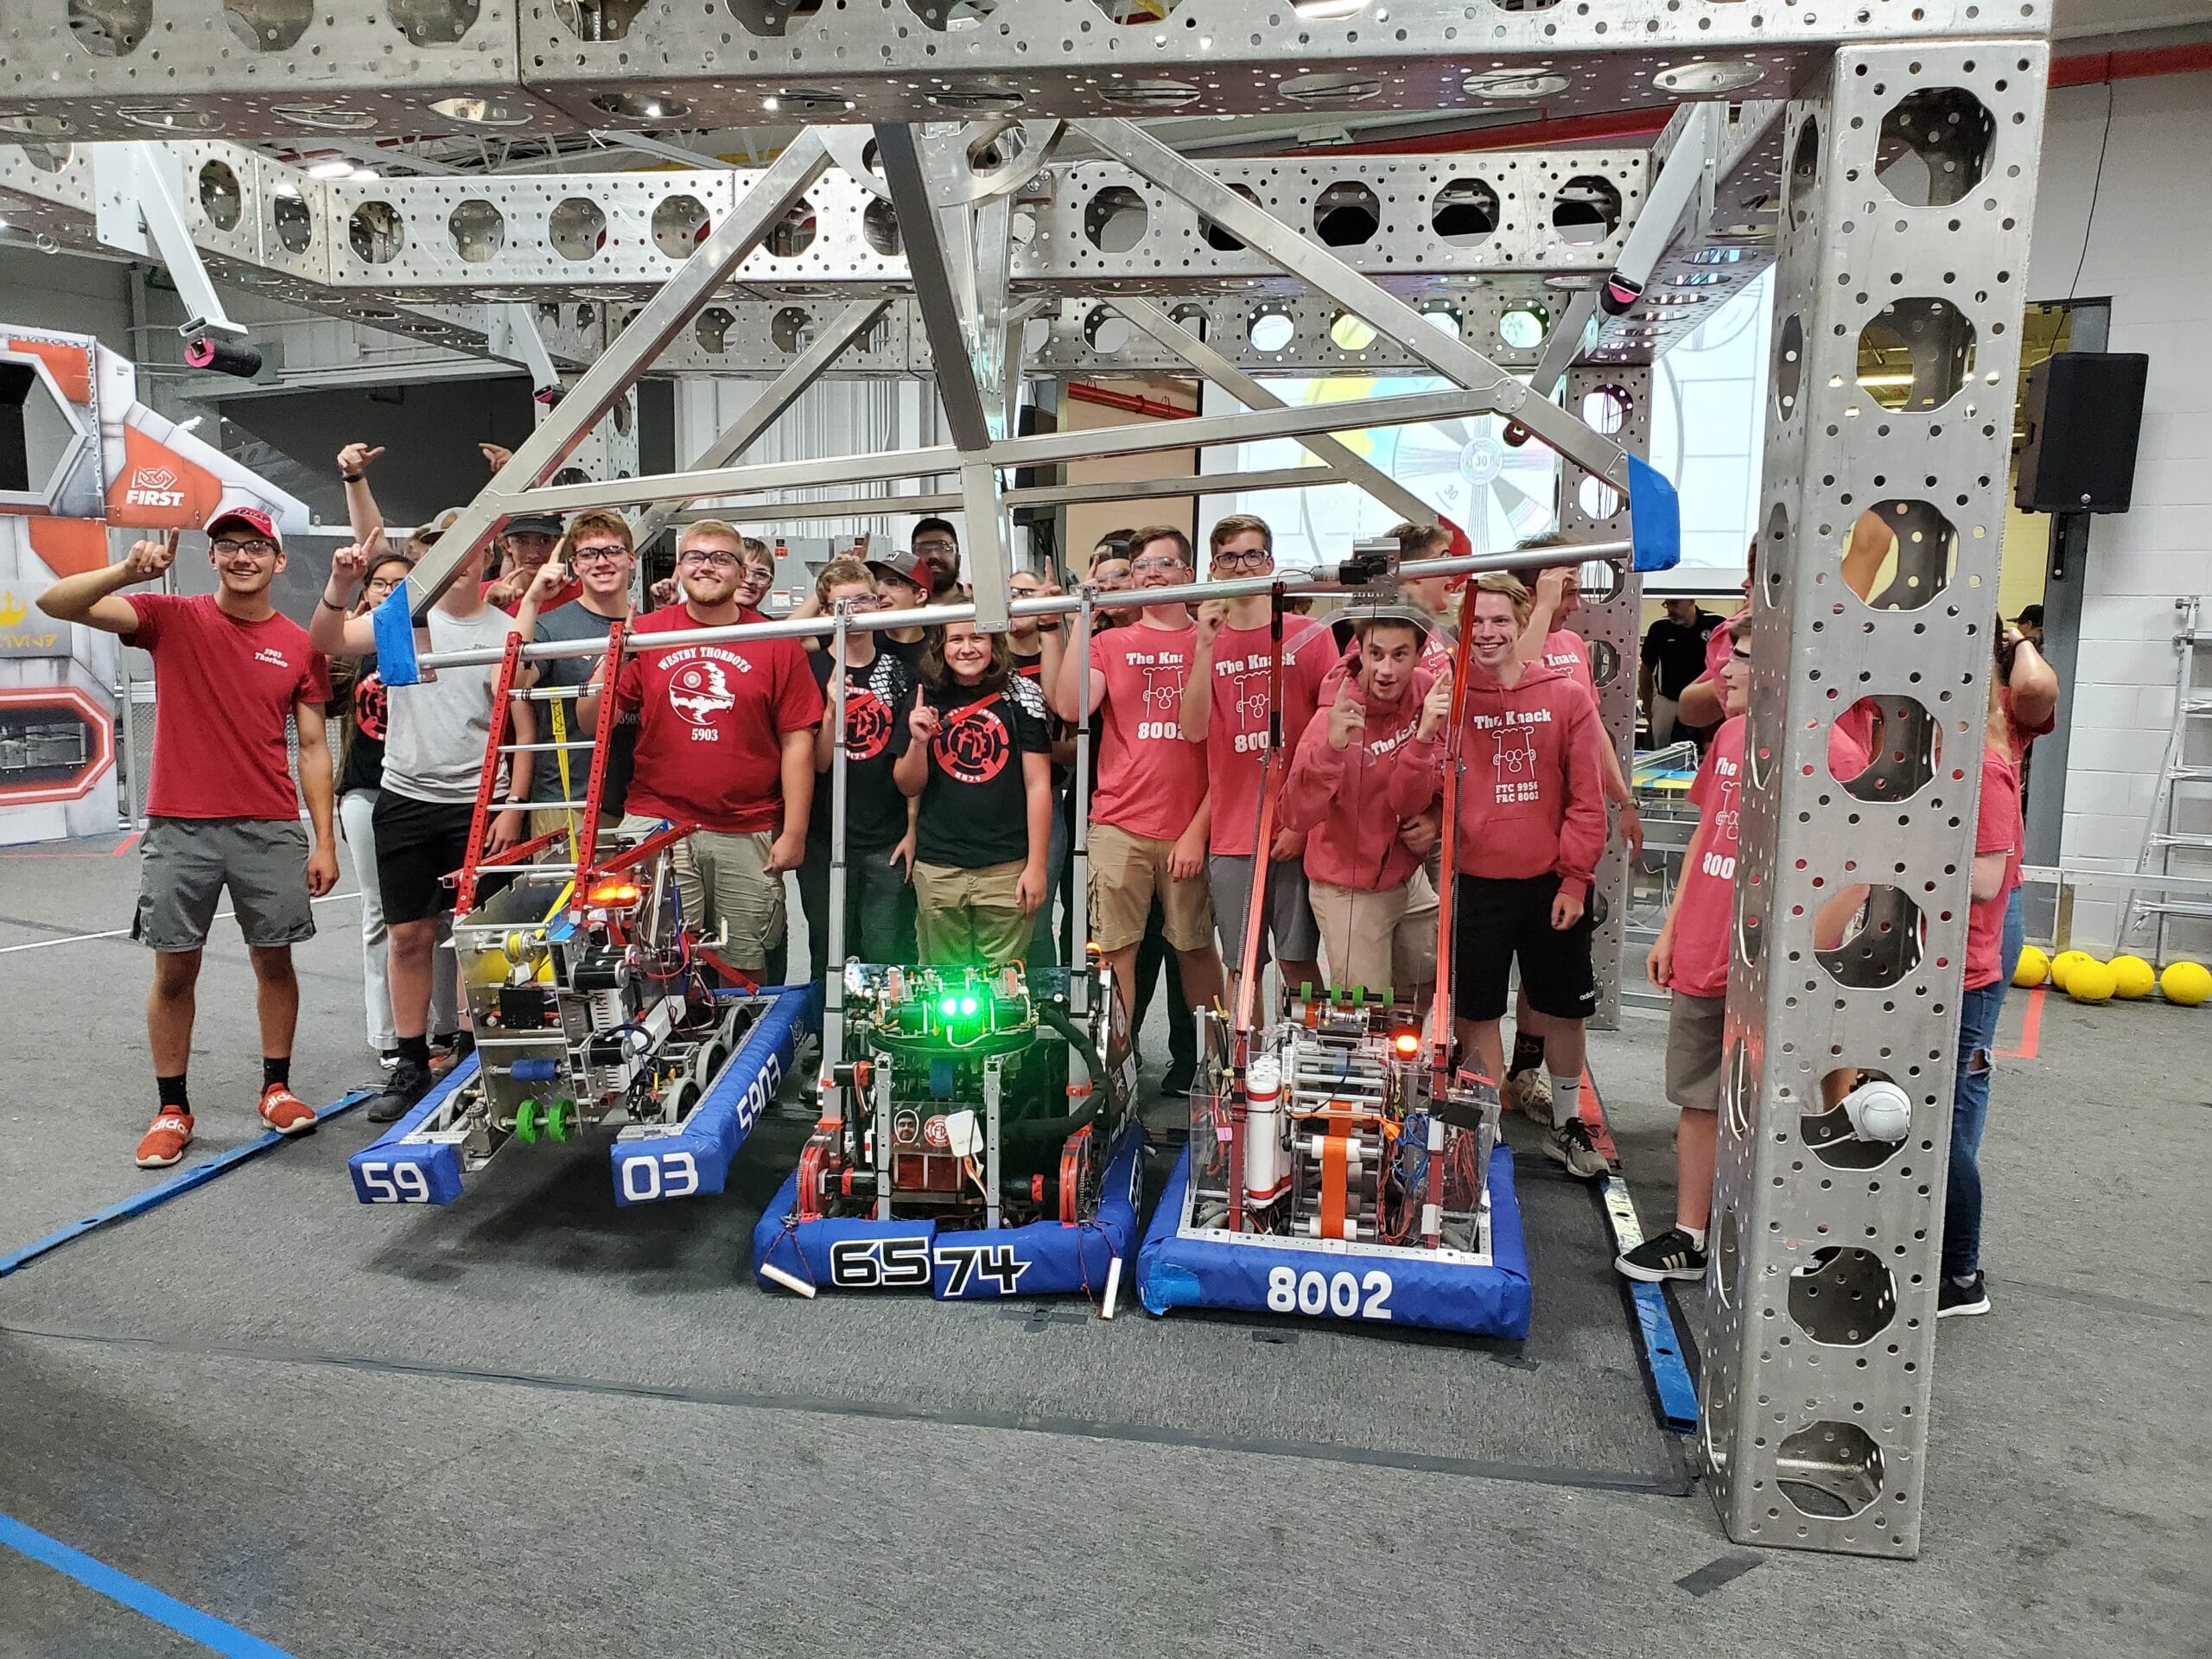 The Winning Alliance After the Last Match